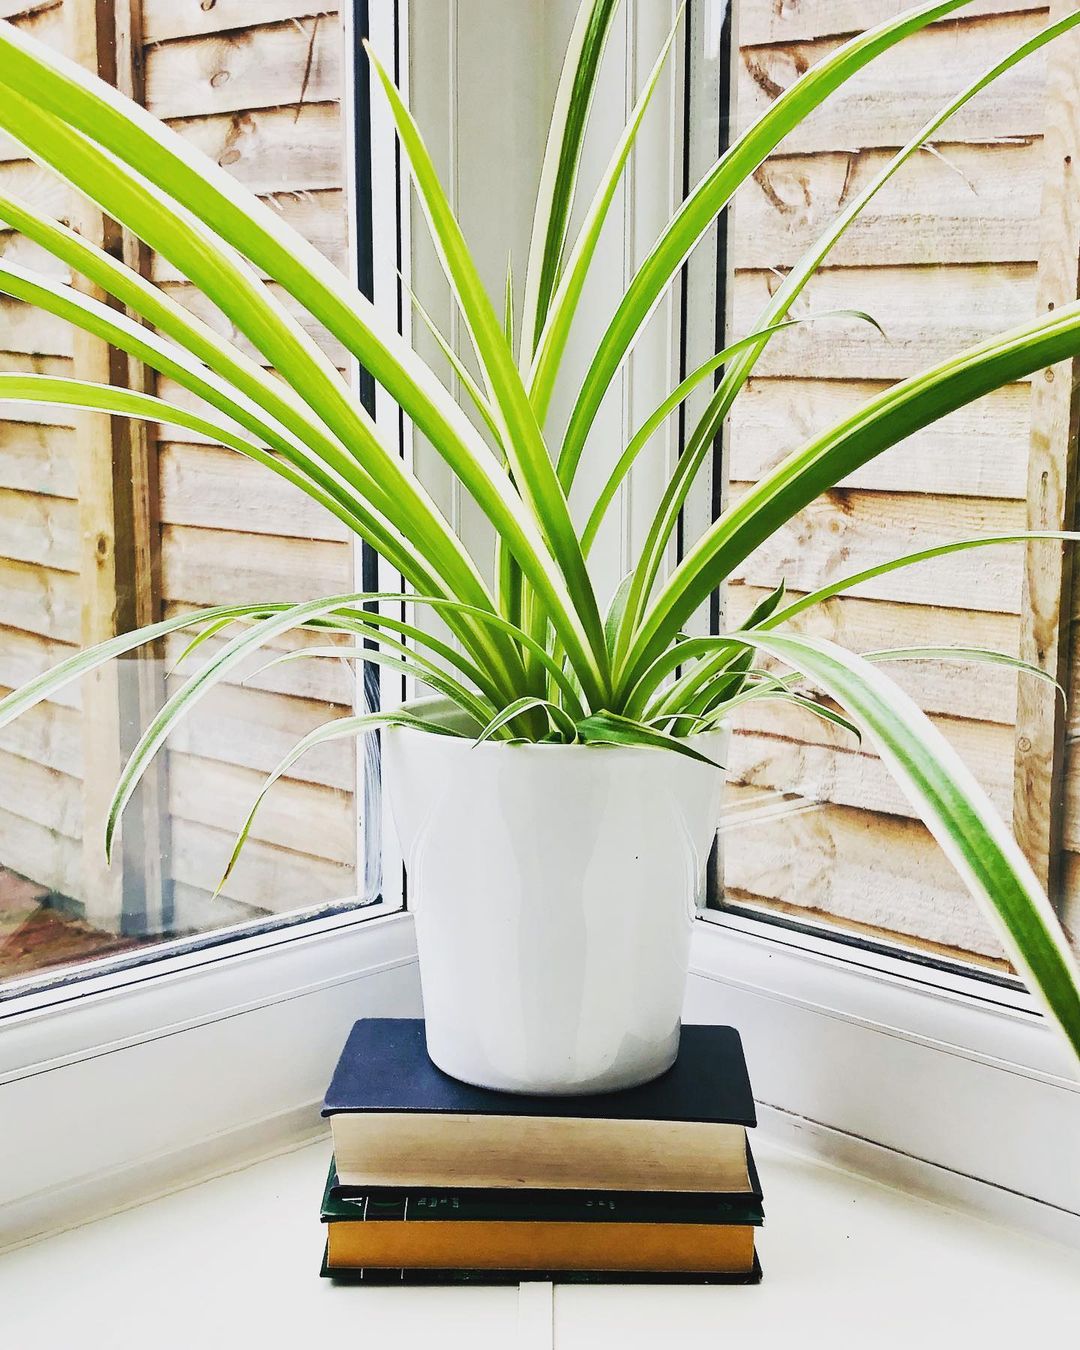 Mature spider plant positioned on a couple of books for aesthetic enjoyment. Photo by Instagram user @keepingupwithroma.k.